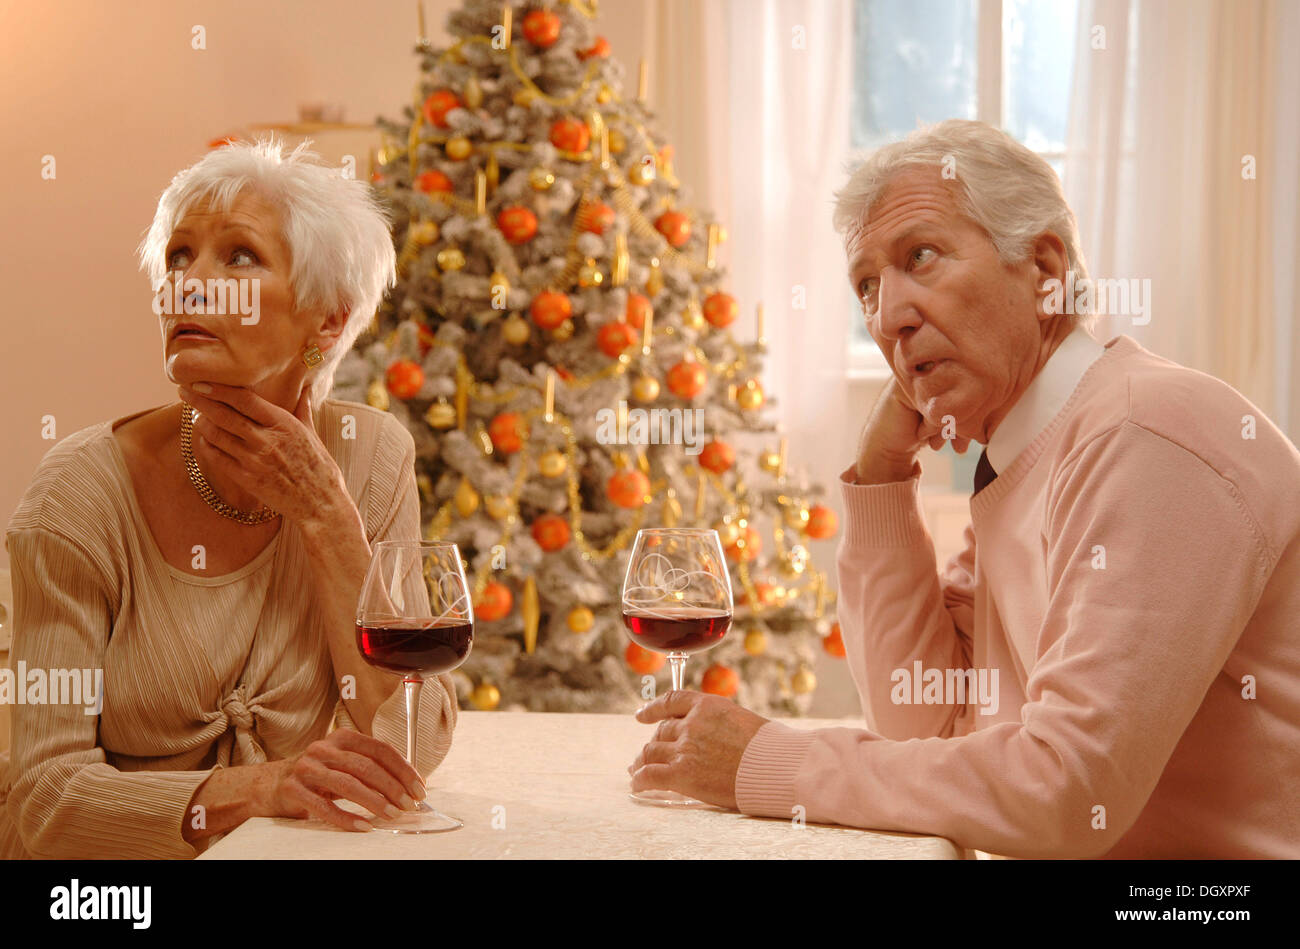 Mature couple sitting at a table with glasses of red wine, looking annoyed, in front of a Christmas tree Stock Photo